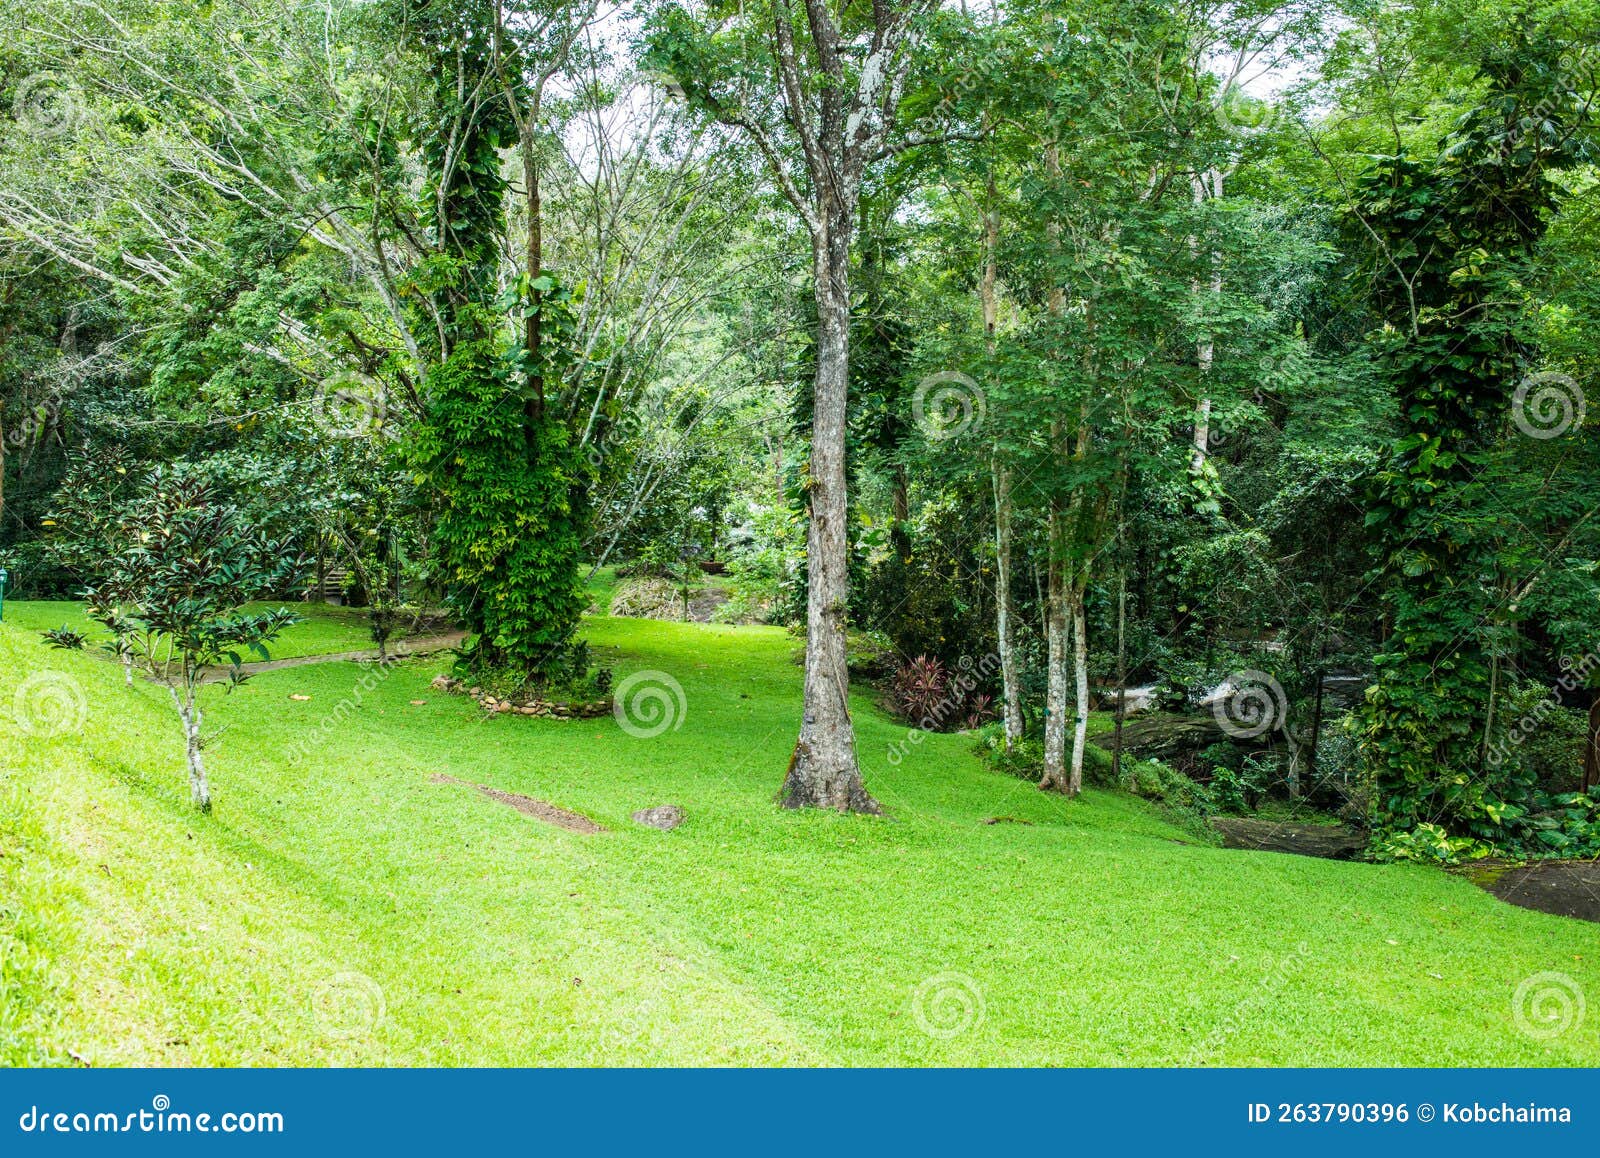 Grass yard with jungle stock photo. Image of thailand - 263790396